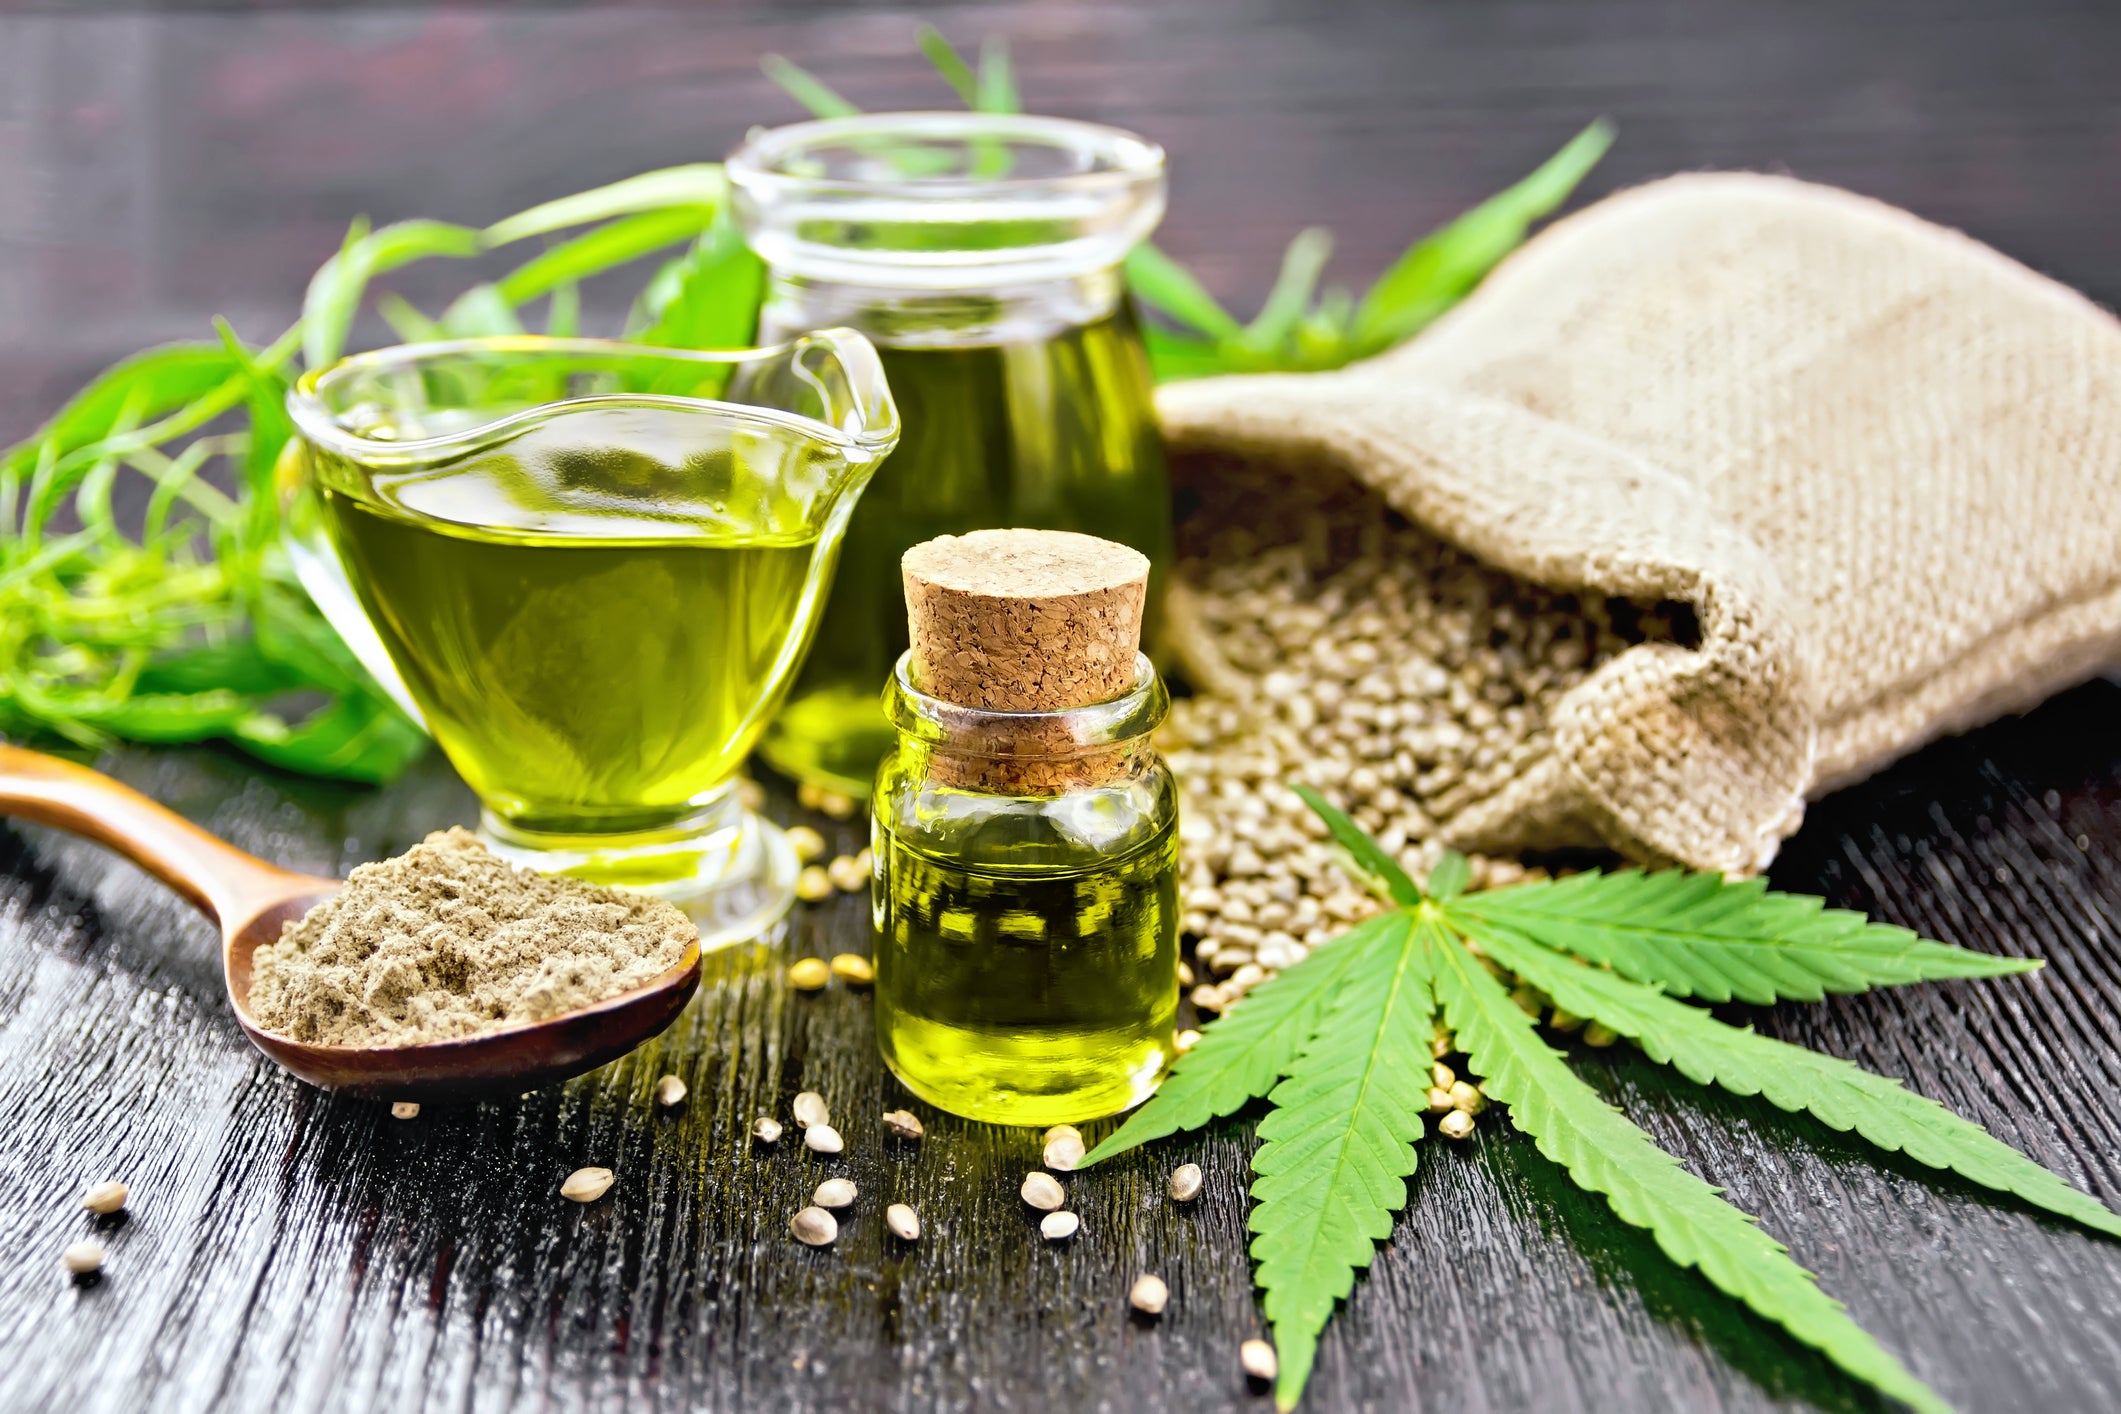 The Retail Market Will Make Up More Than 60% of CBD Sales in the U.S. by 2024 | The Motley Fool